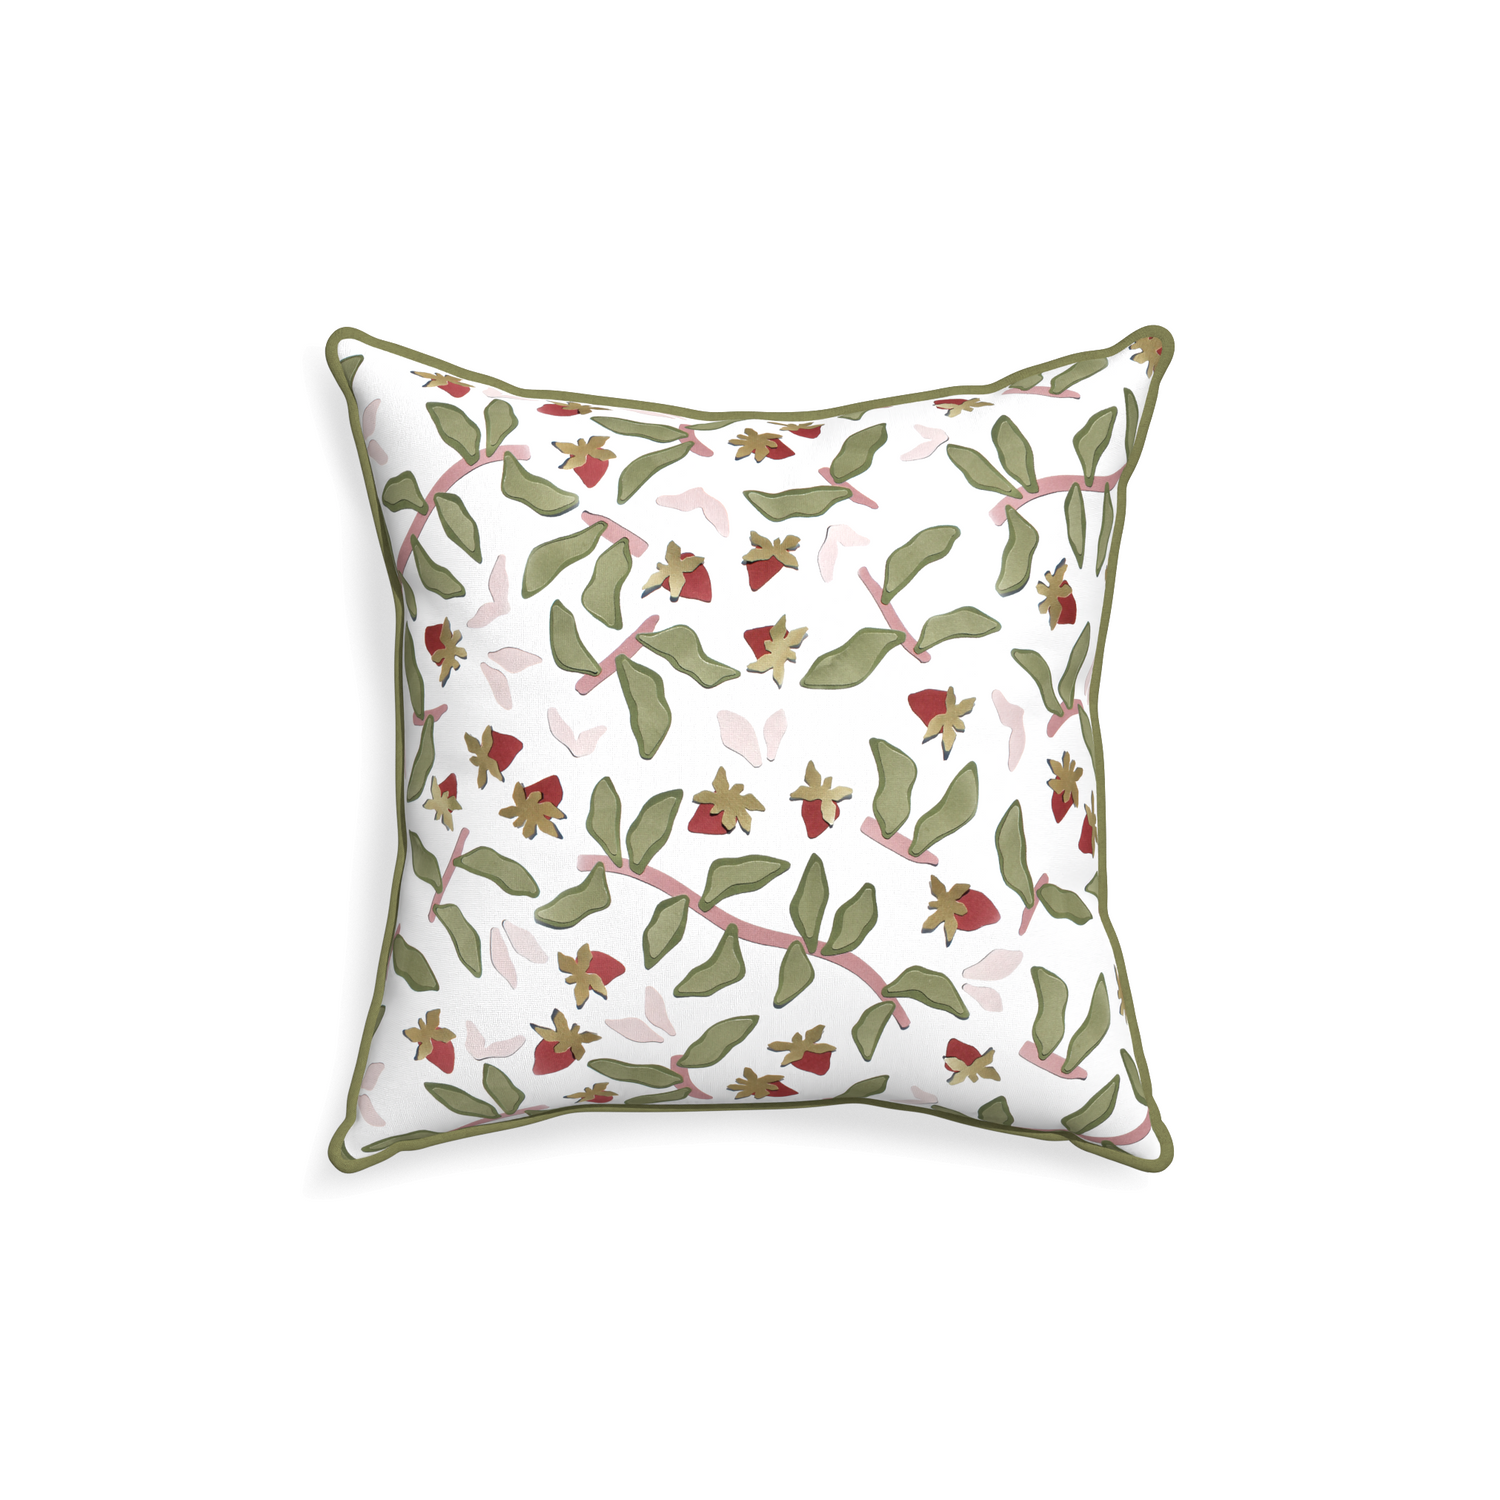 18-square nellie custom pillow with moss piping on white background